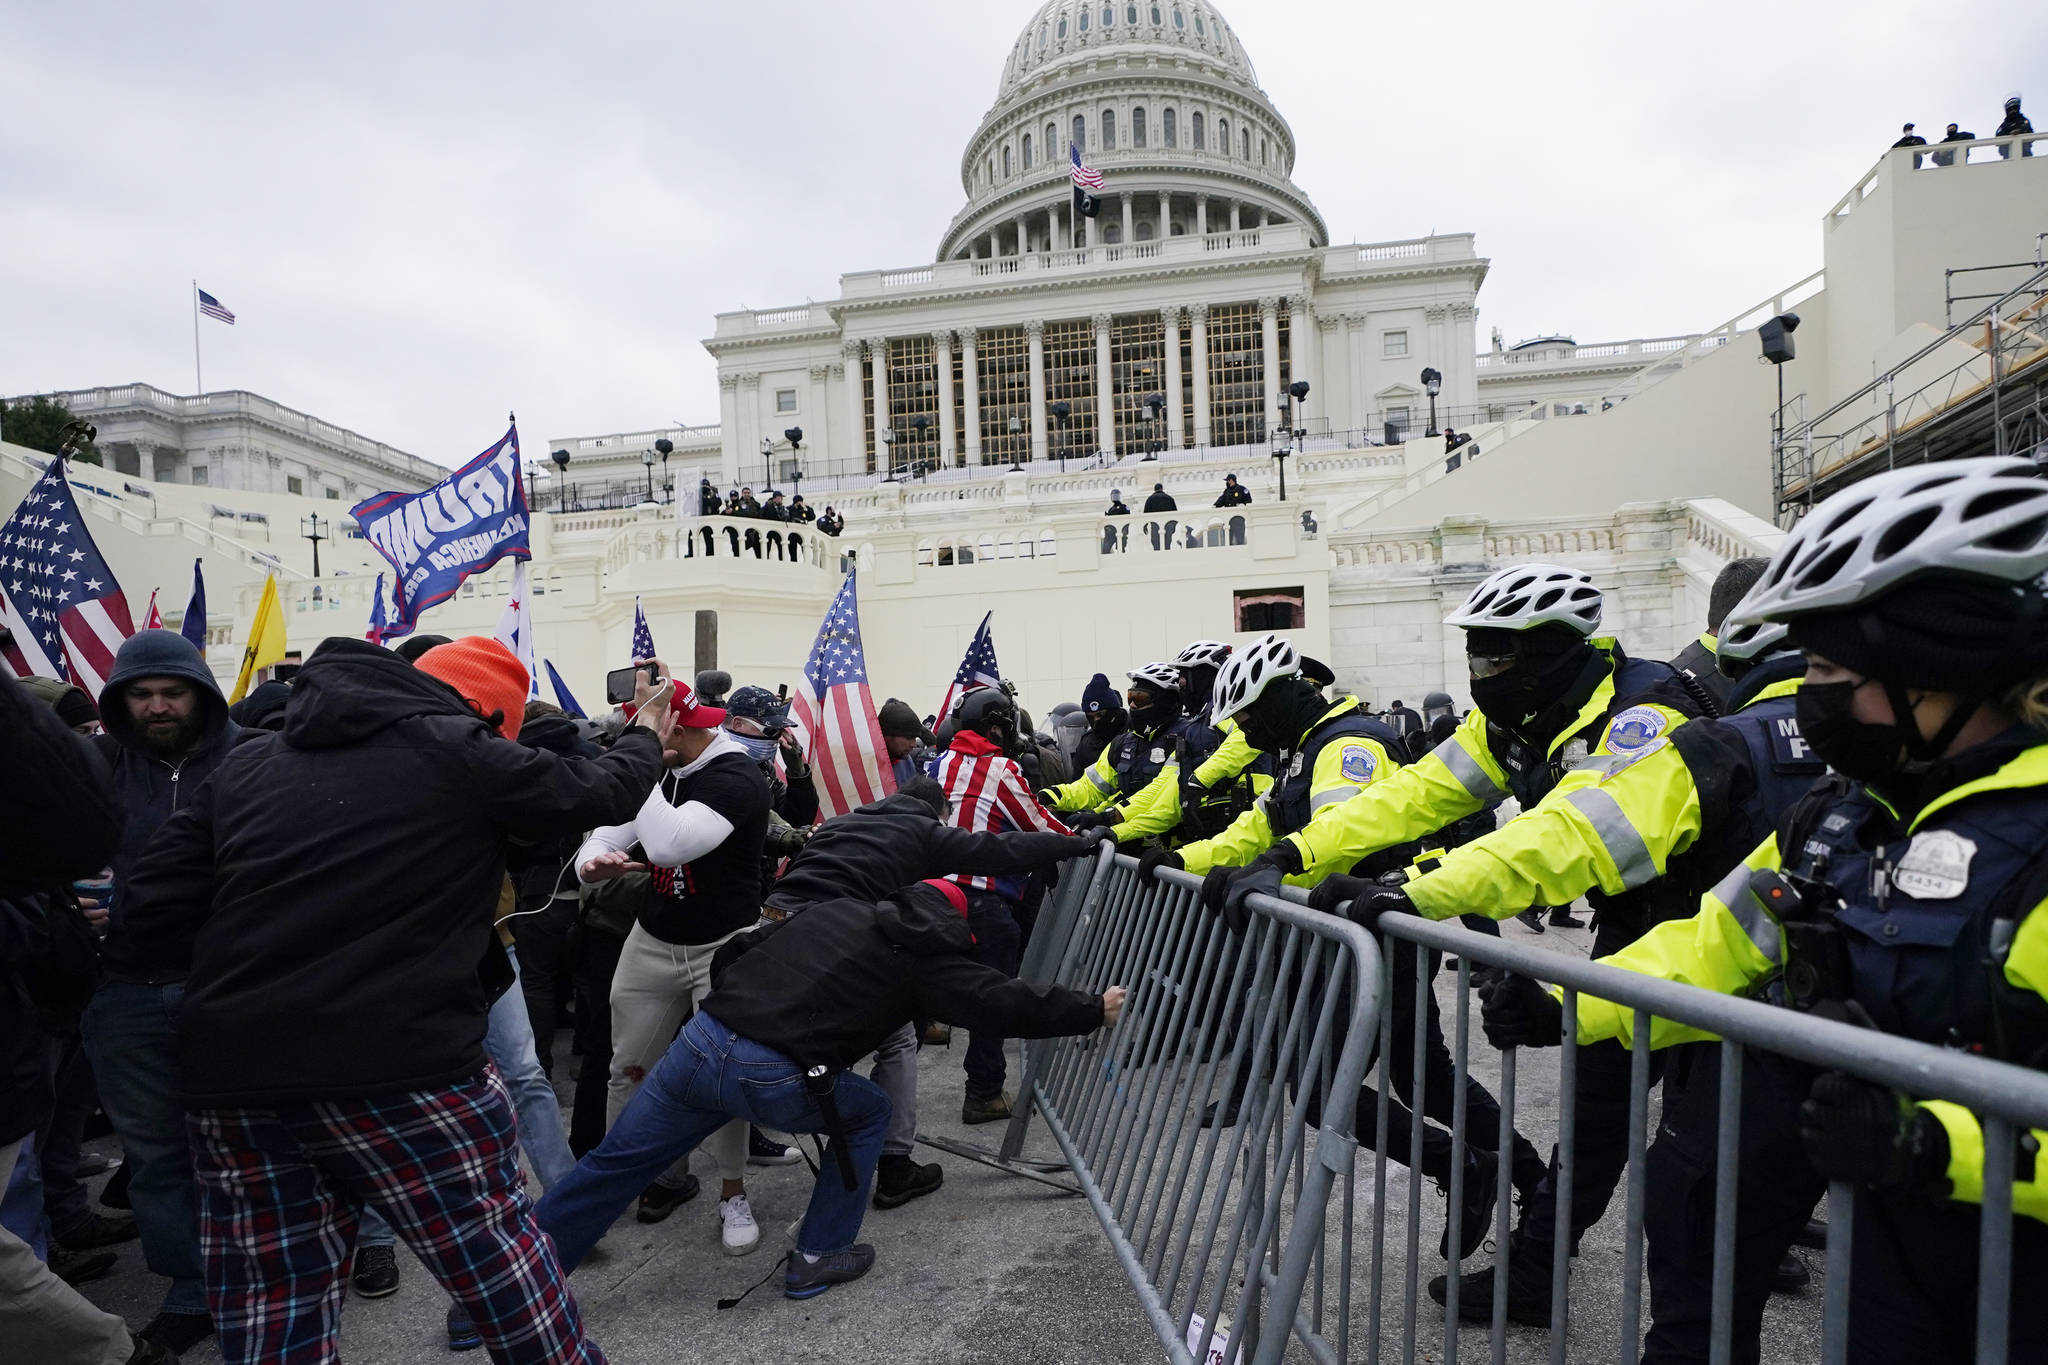 Trump supporters try to break through a police barrier, Wednesday, Jan. 6, 2021, at the Capitol in Washington. As Congress prepares to affirm President-elect Joe Biden’s victory, thousands of people have gathered to show their support for President Donald Trump and his claims of election fraud. (AP Photo / Julio Cortez)